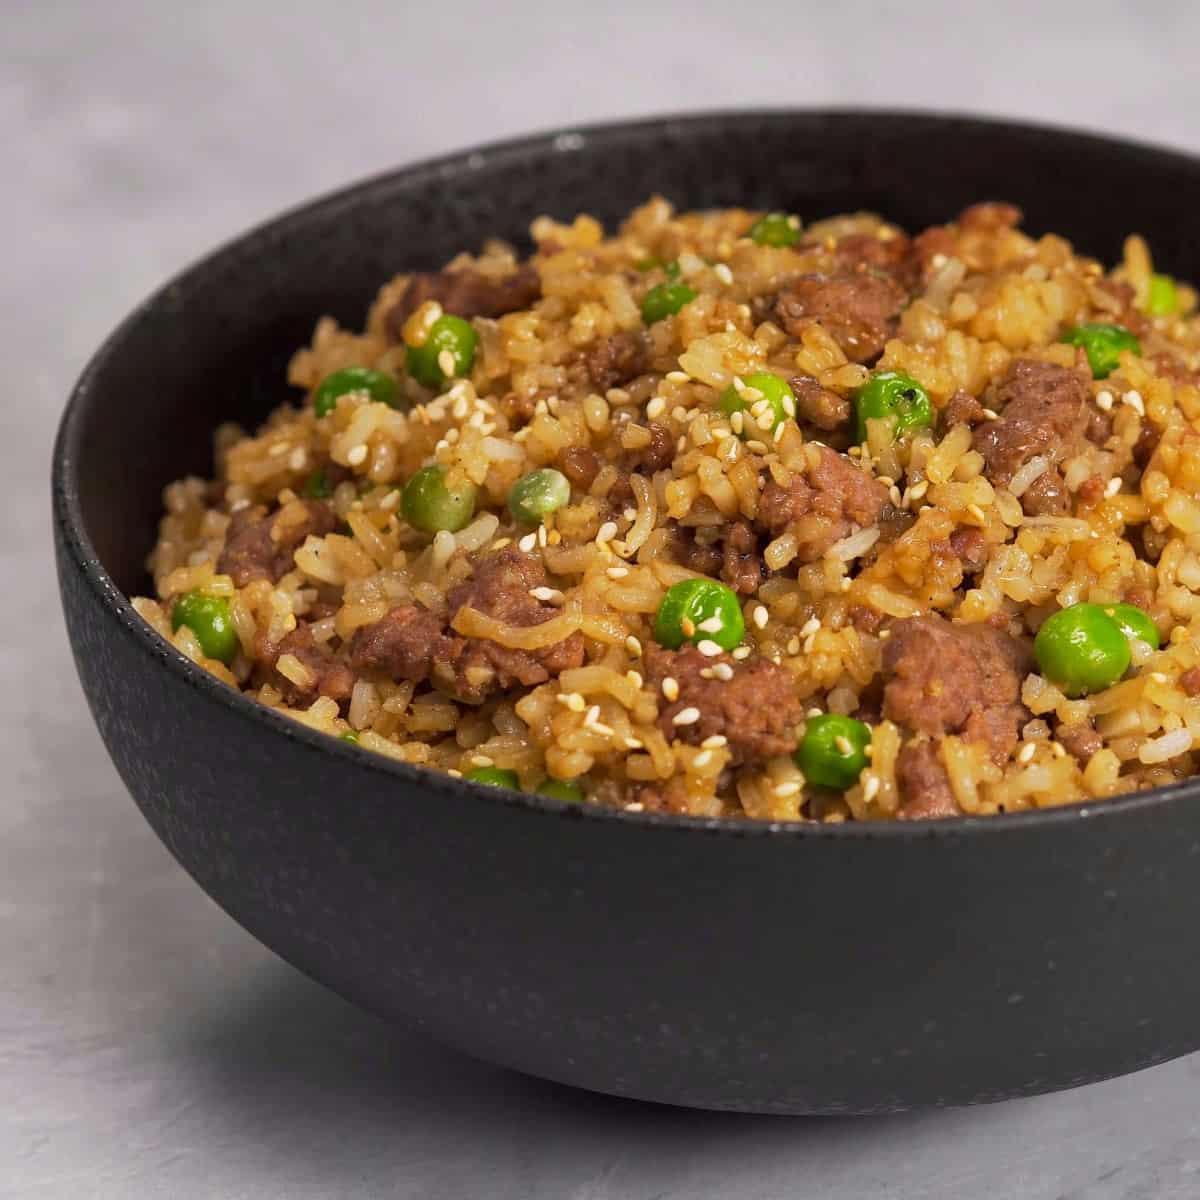 Pork fried rice with peas in a black bowl.